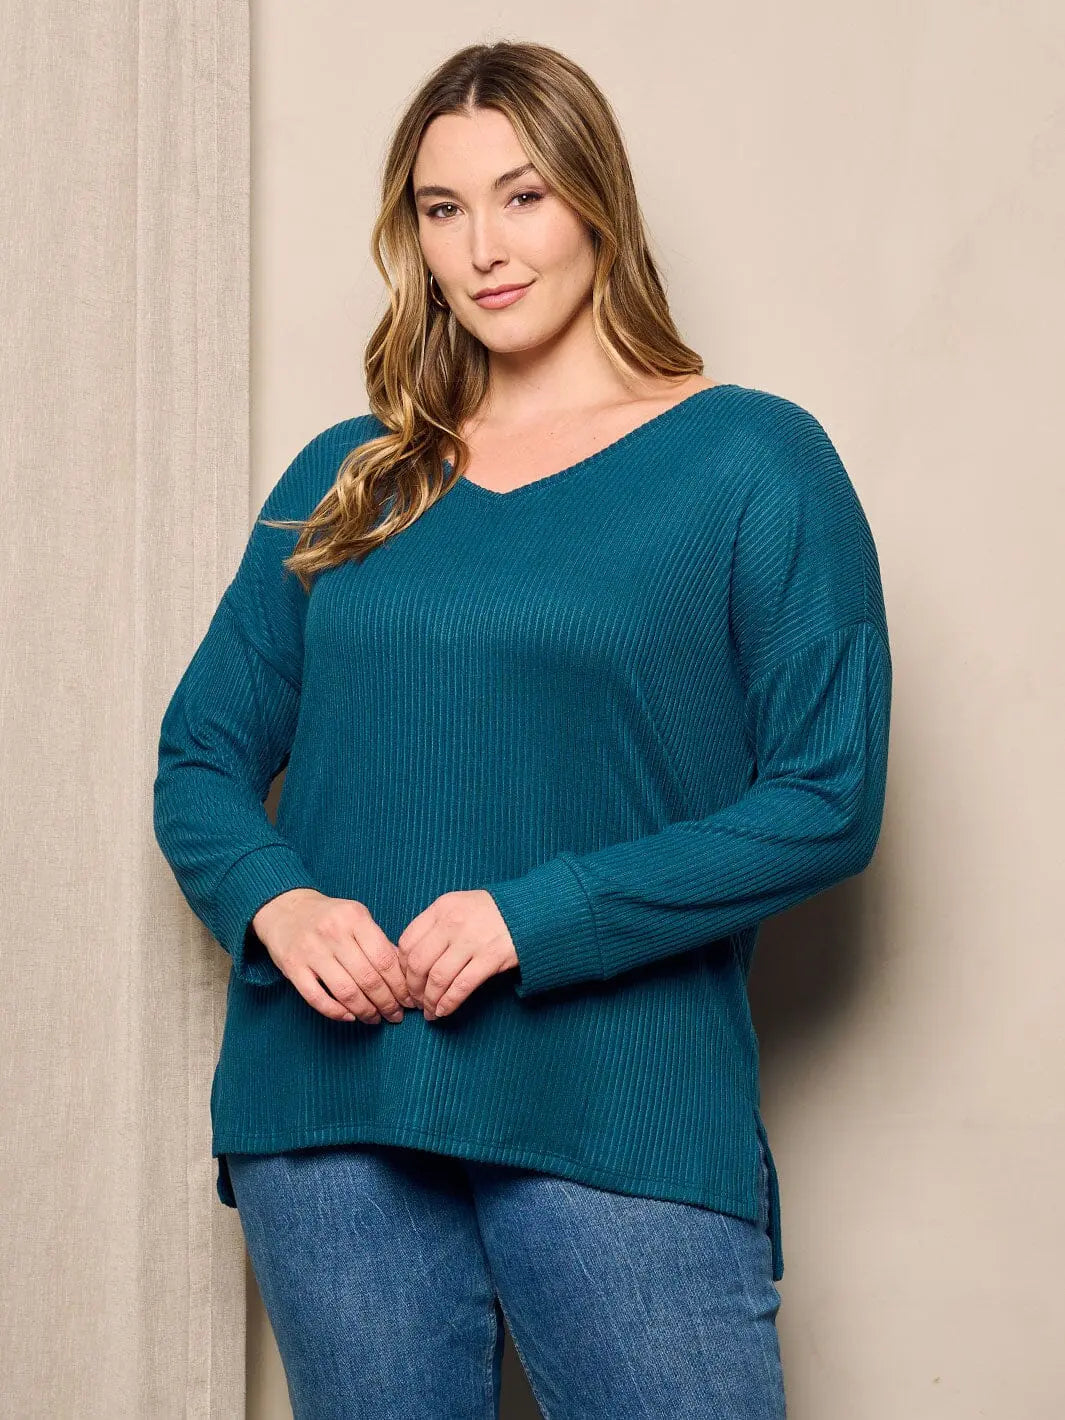 Ribbed Plus Size Top - Scarlett's Riverside Boutique 